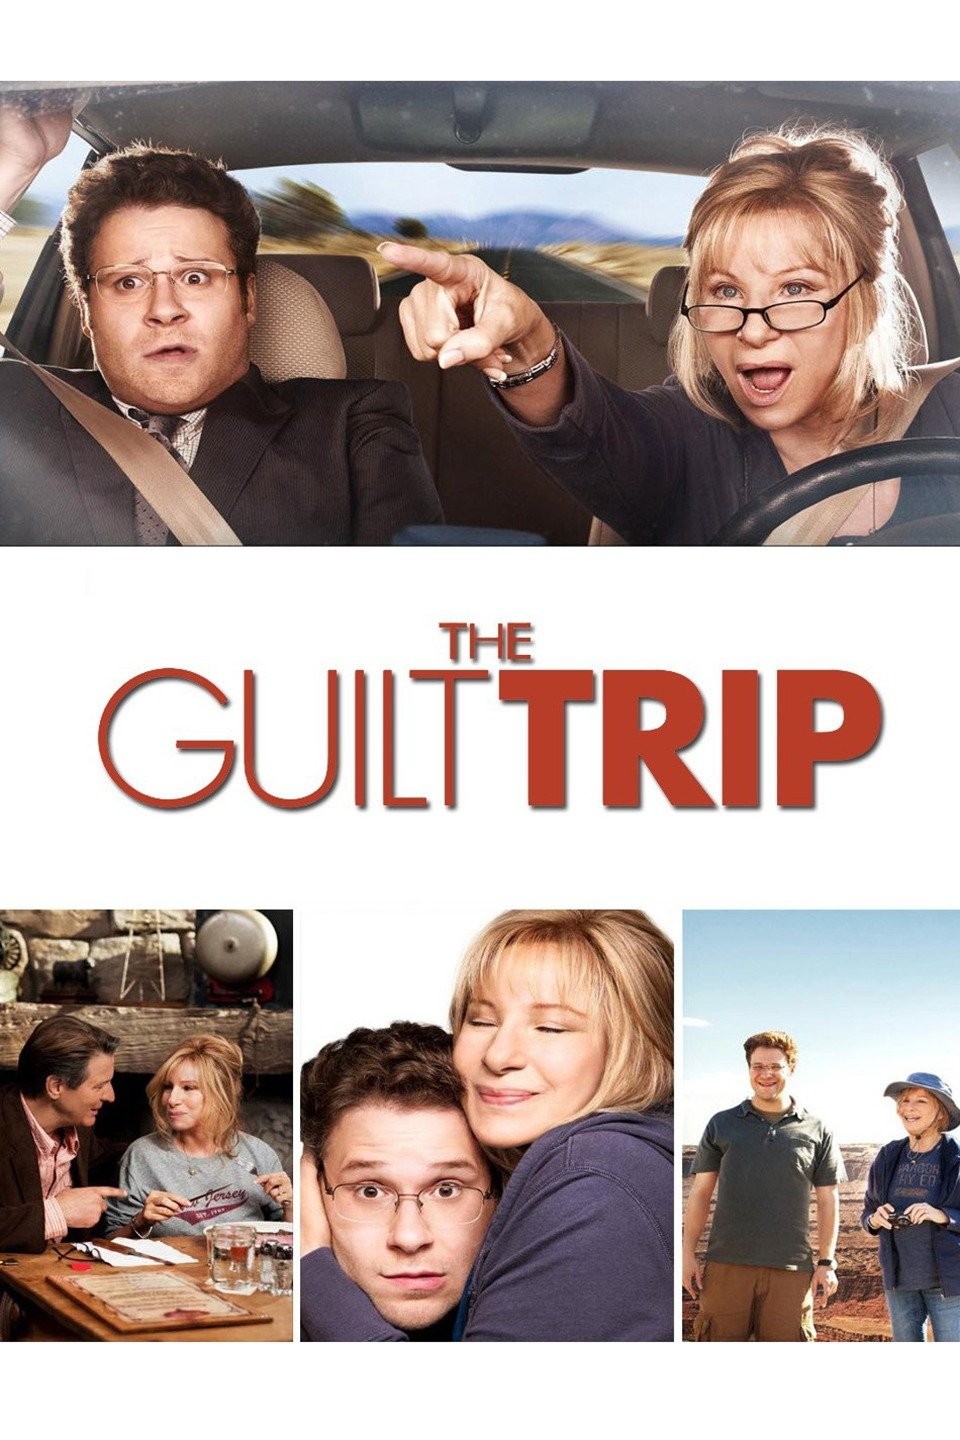 the guilt trip summary